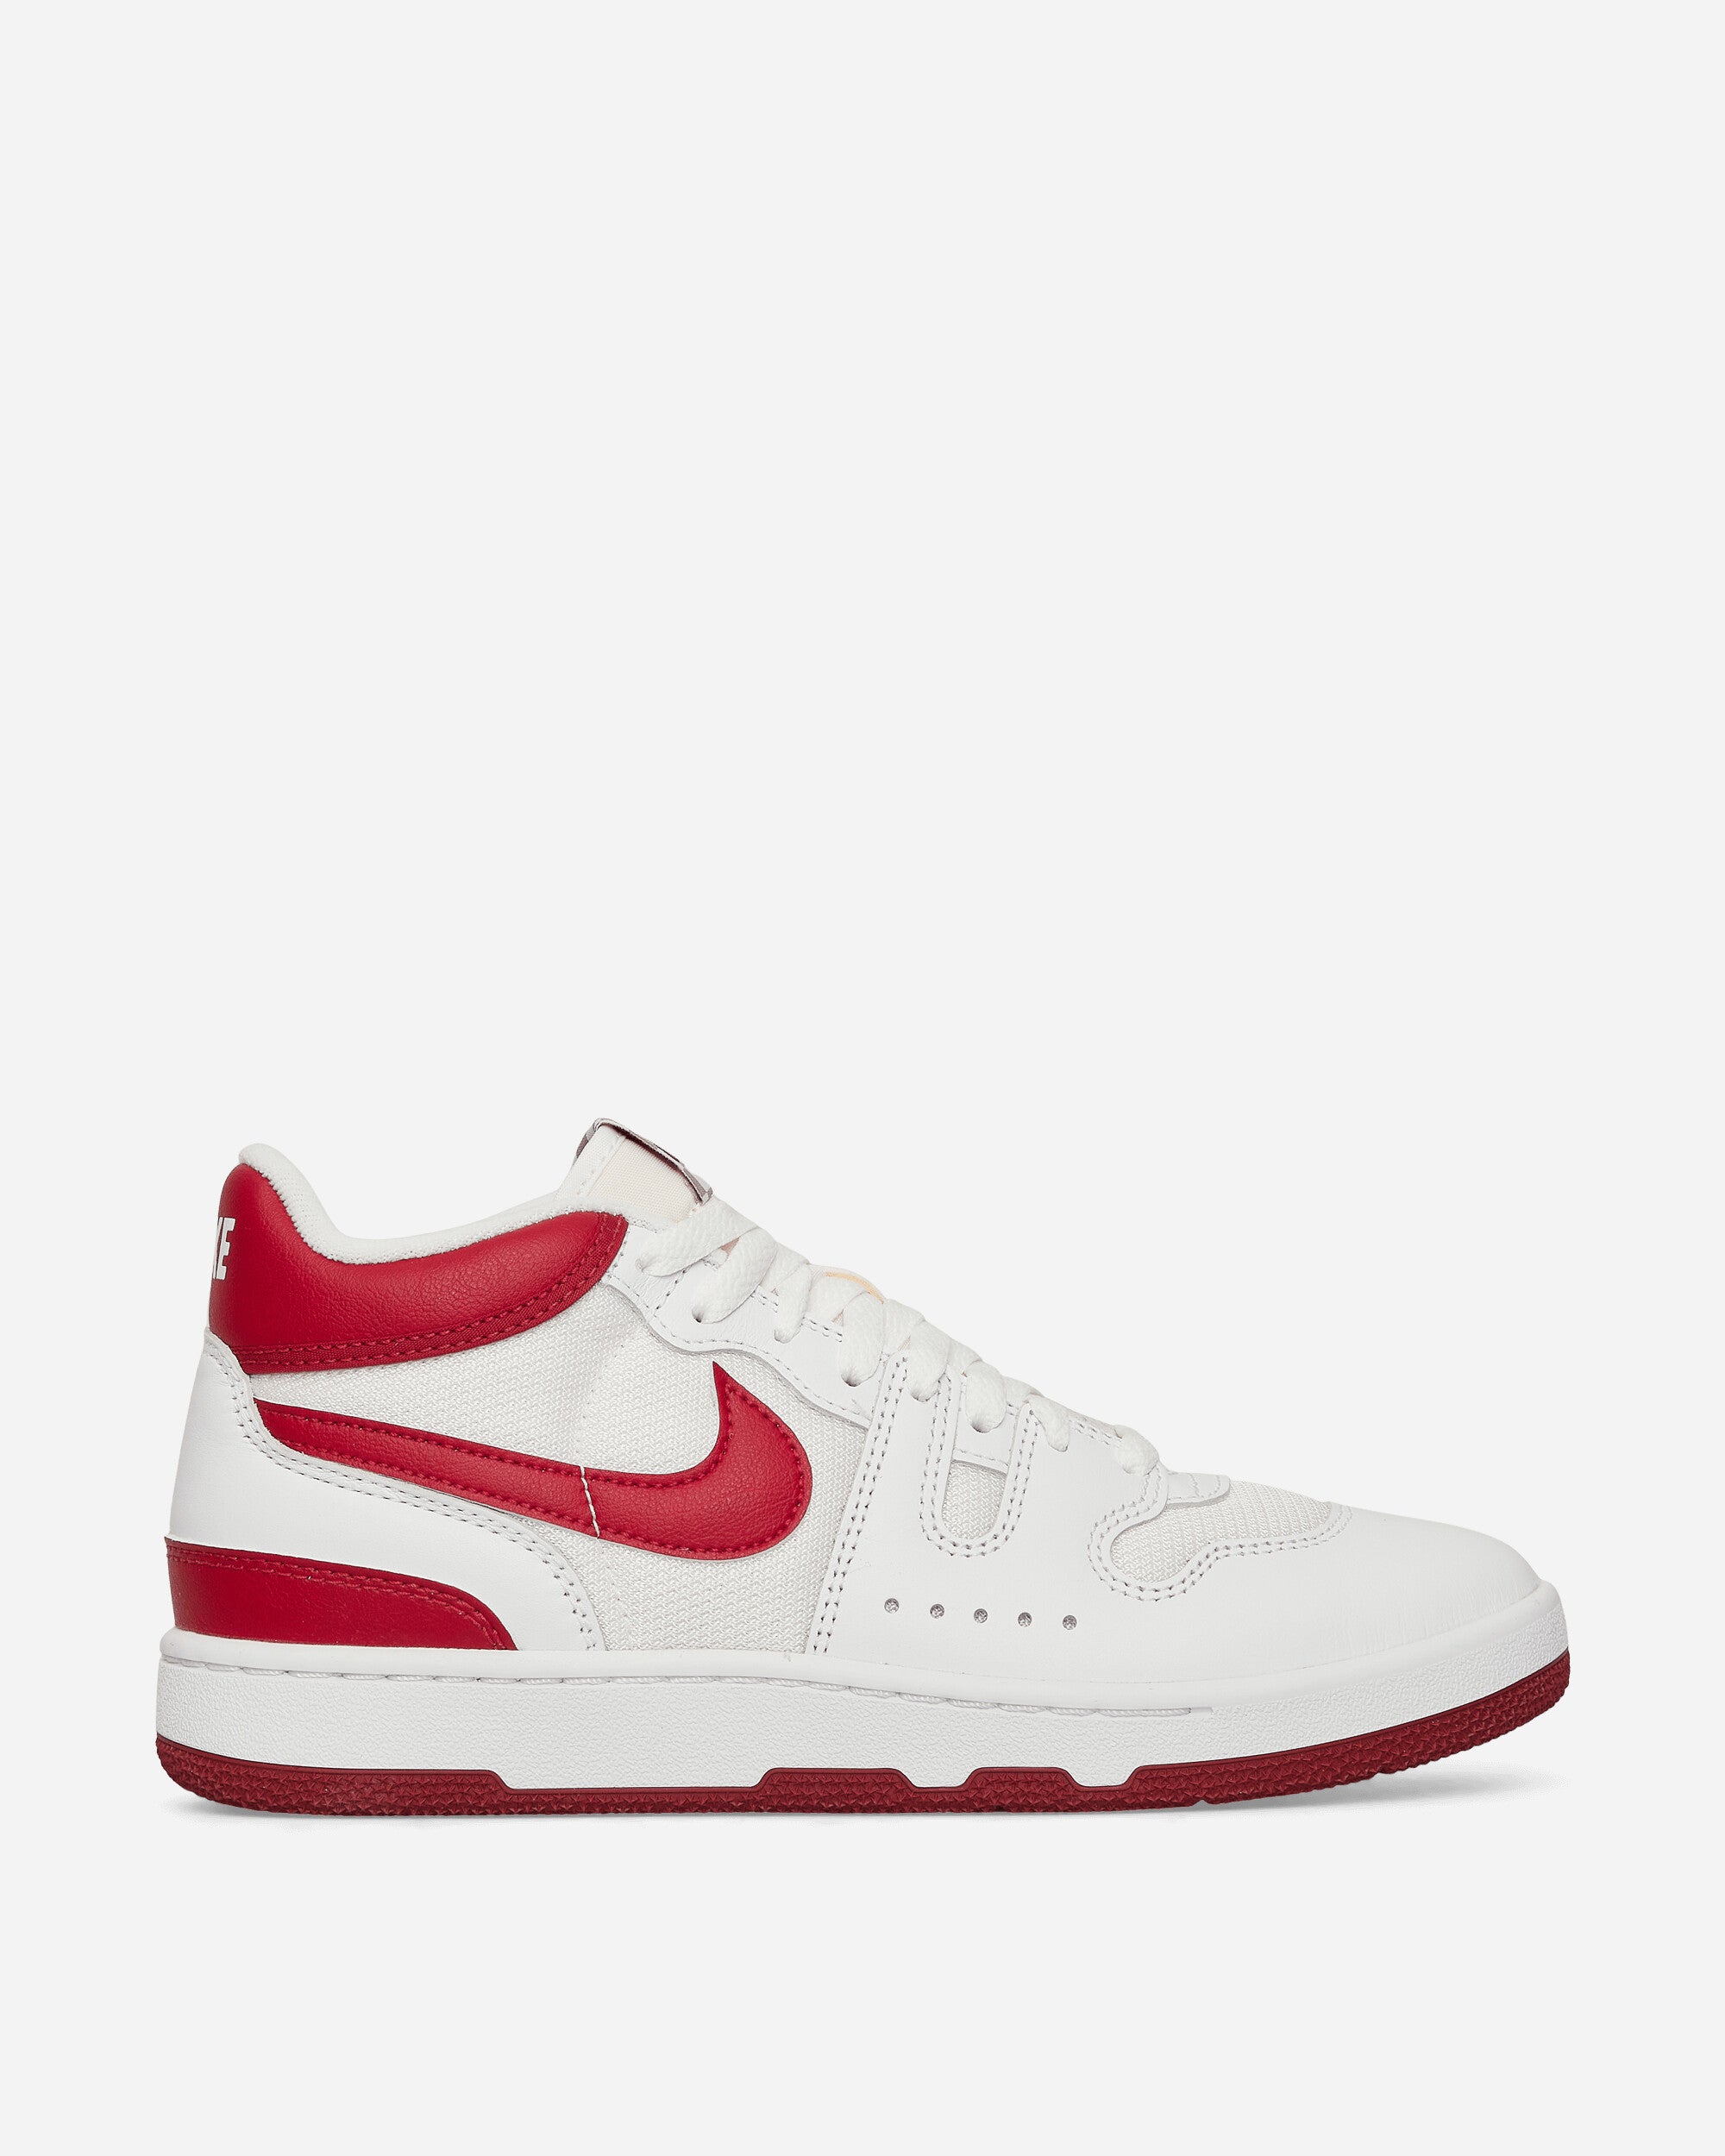 Nike Attack QS SP 